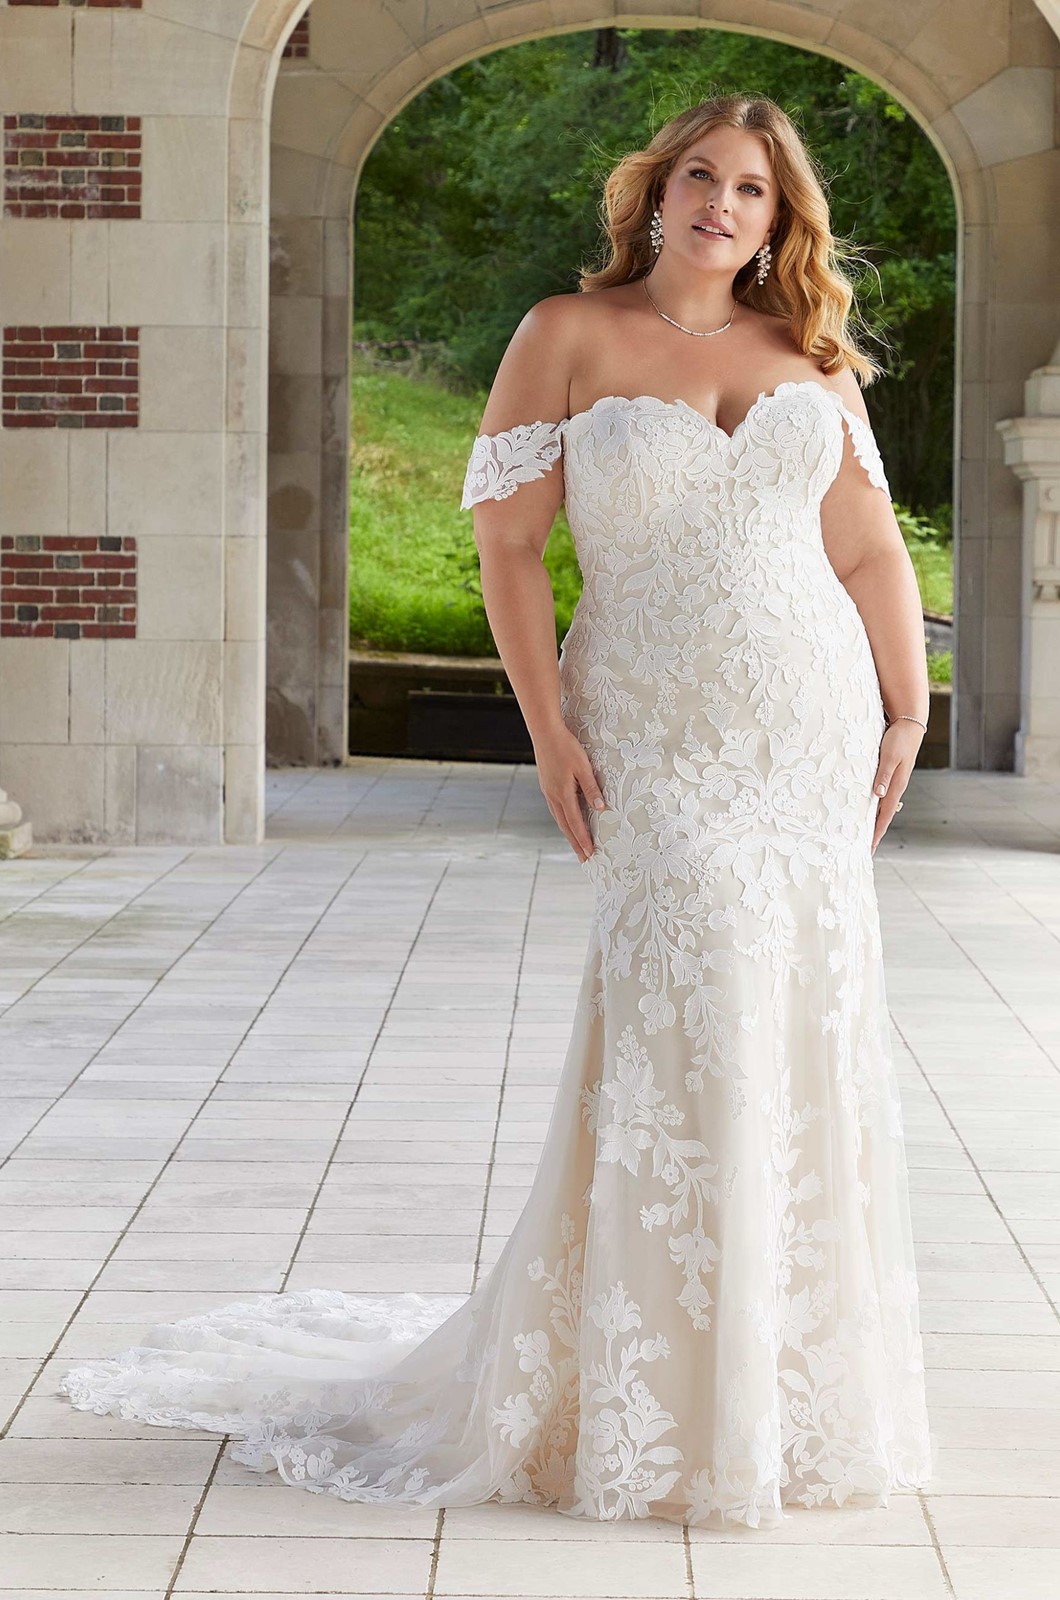 All Wedding Gowns | Margene's Bridal